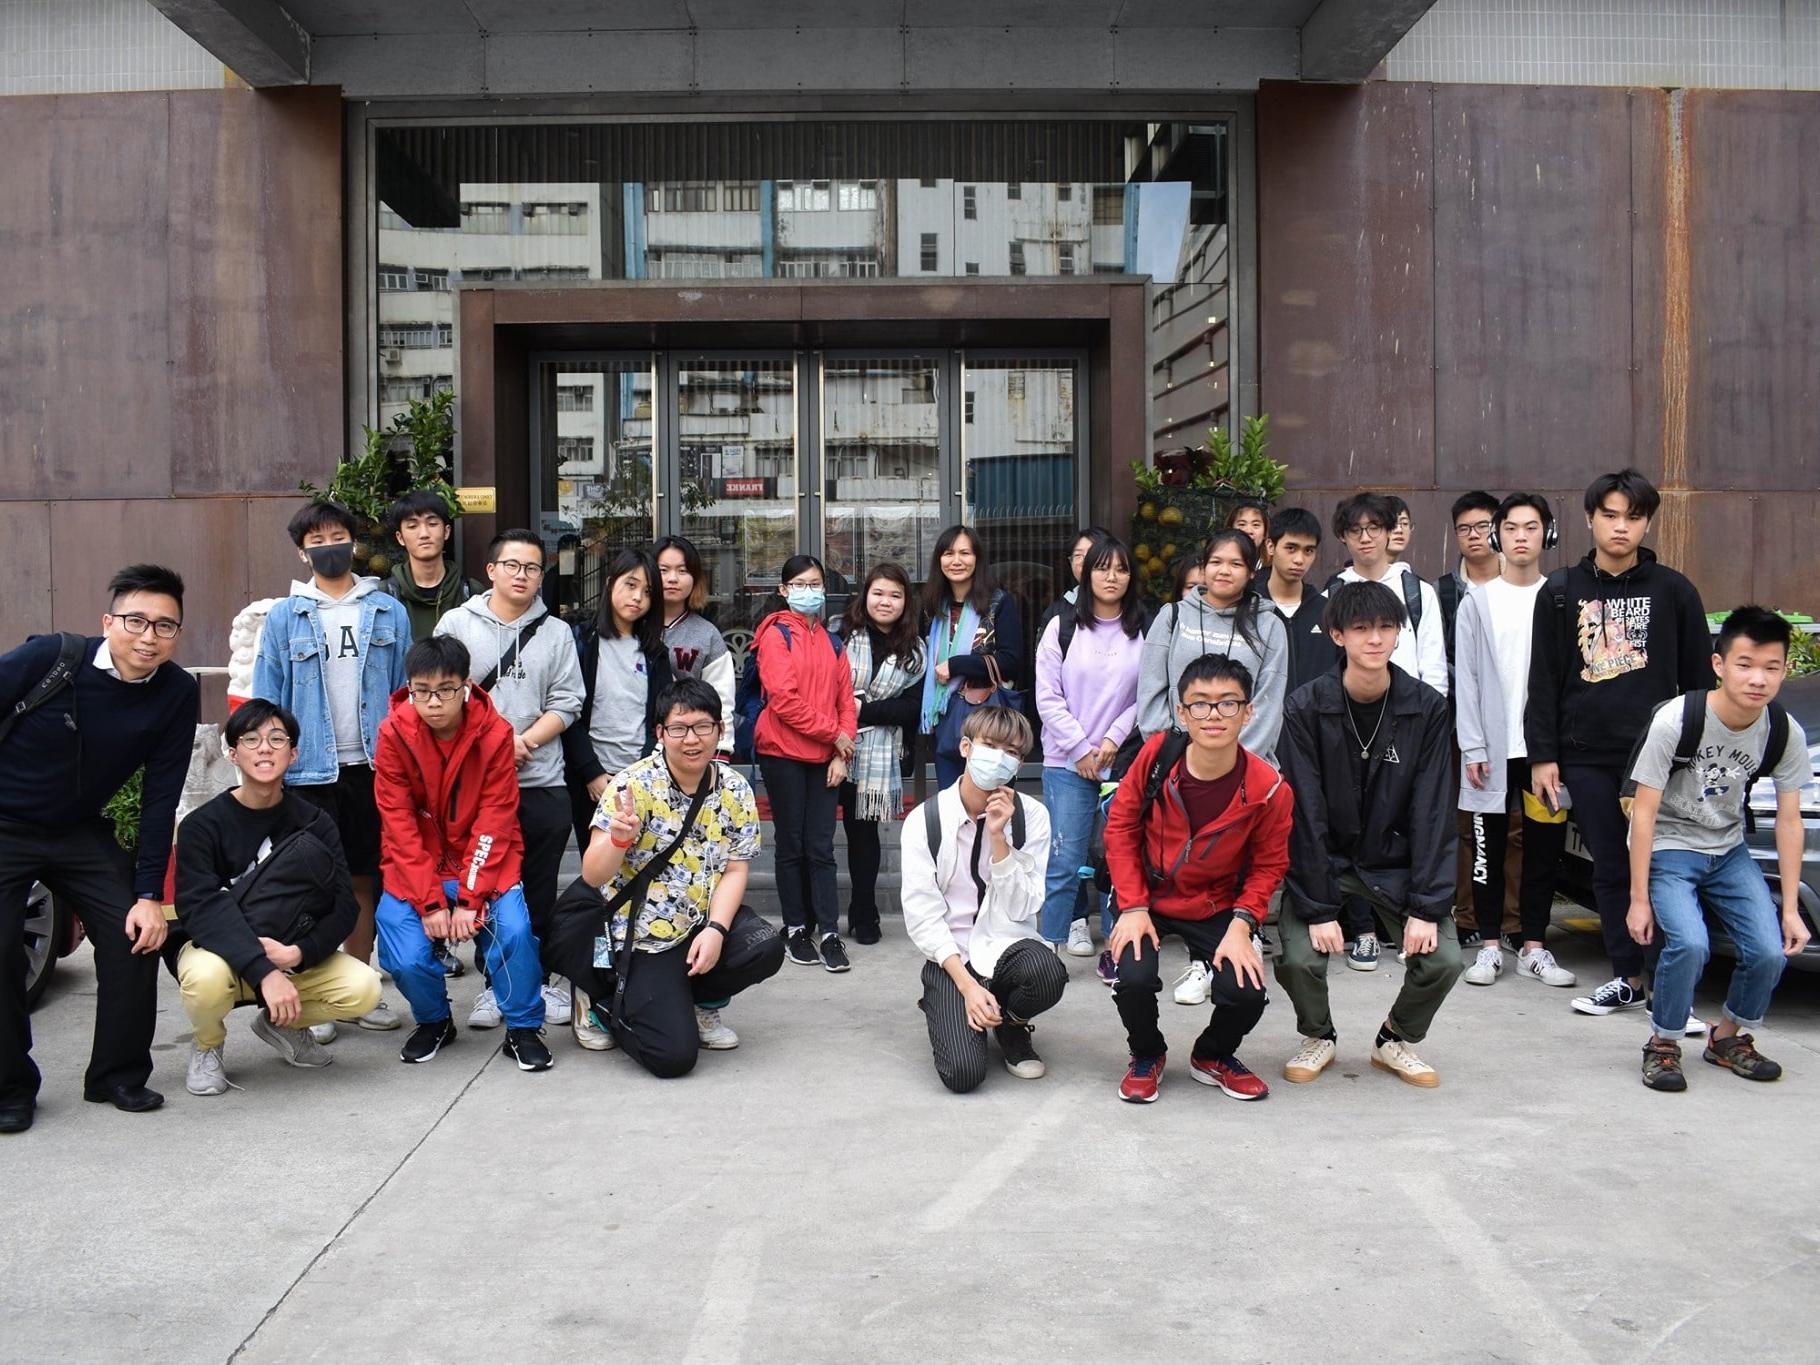 Business students took a group photo at Tao Heung Museum of Food Culture.